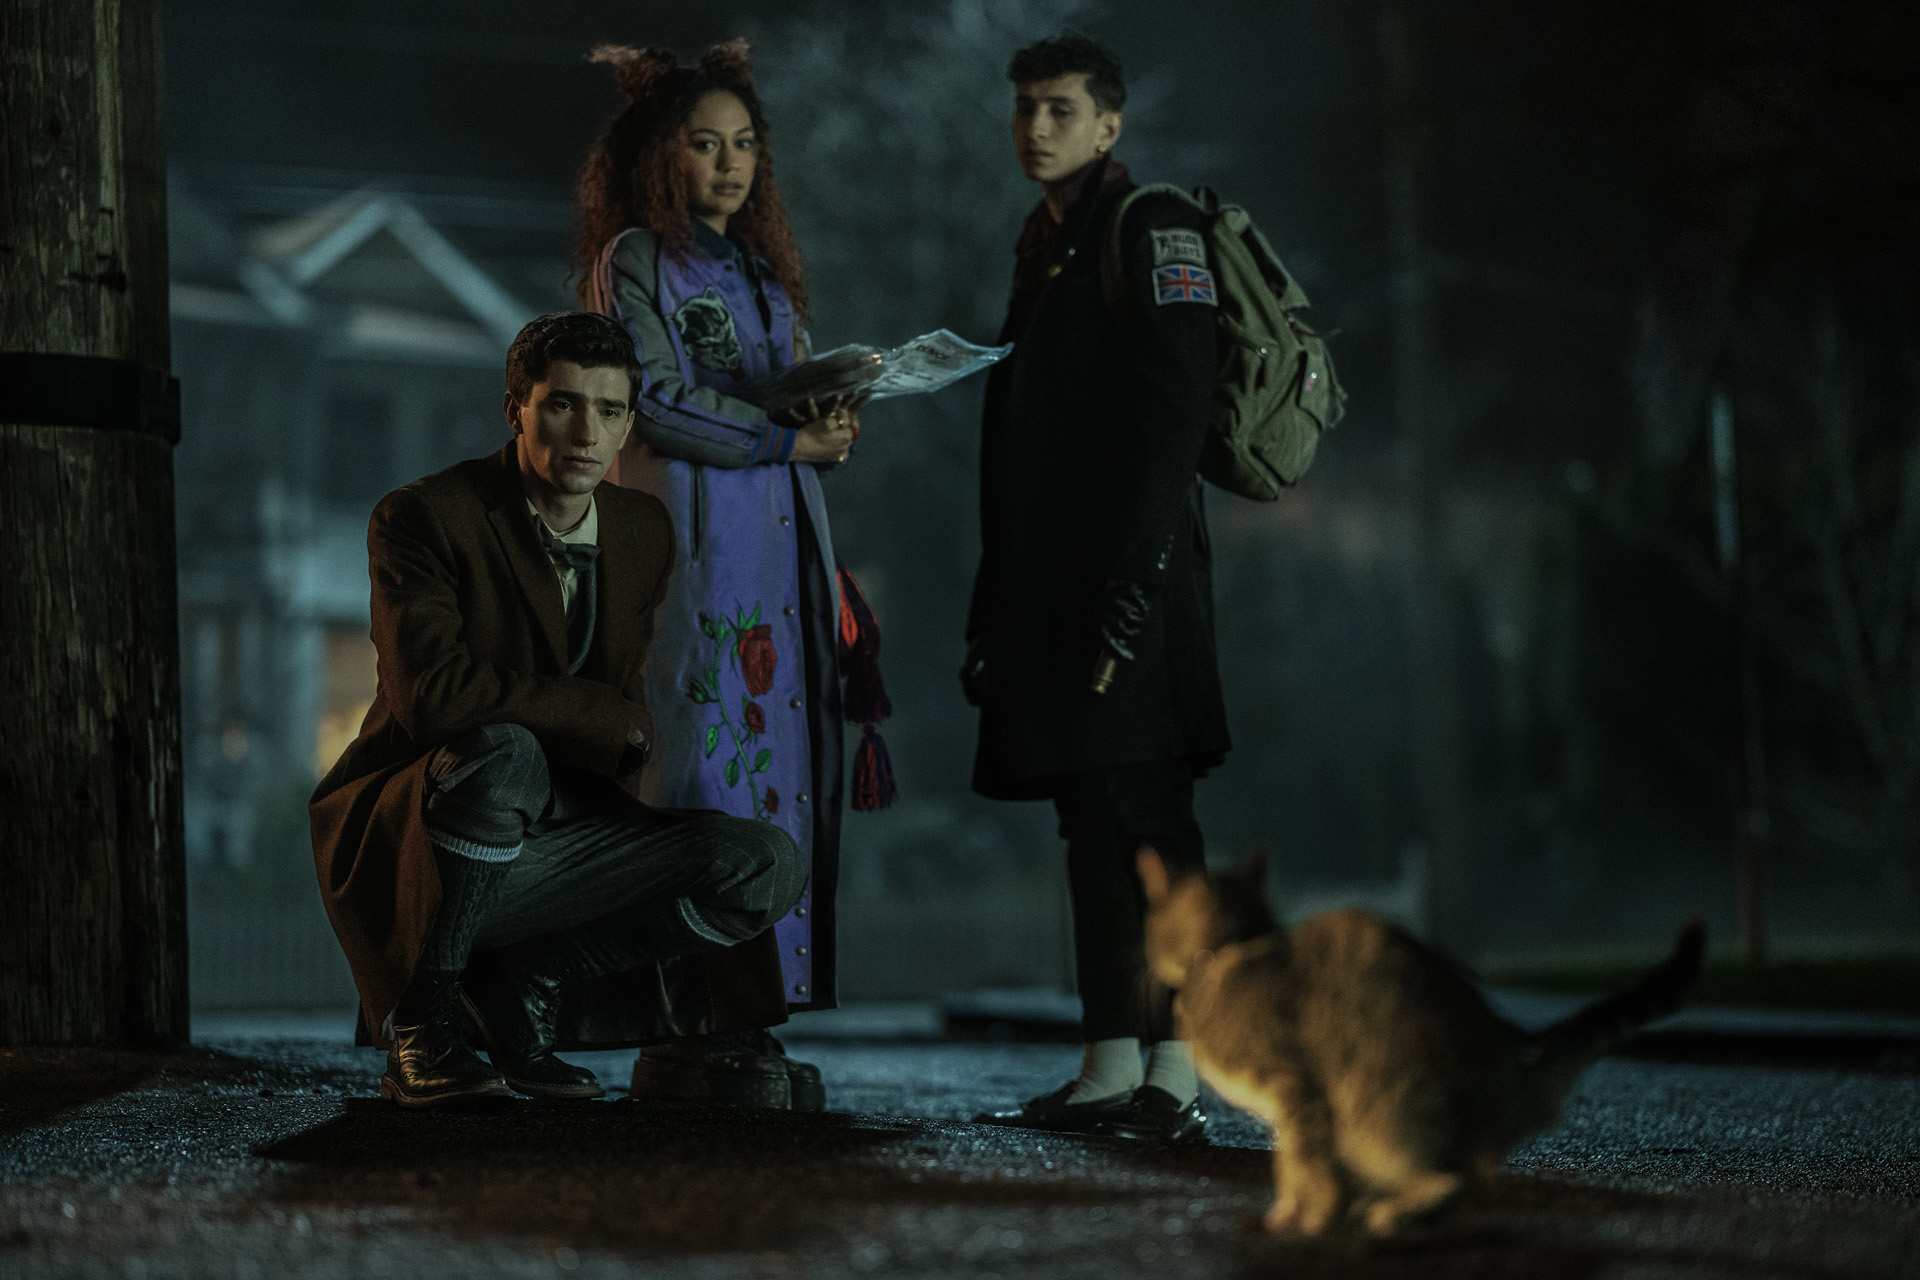 (L-R) George Rexstrew as Edwin Payne, Kassius Nelson as Crystal Palace and Jayden Revri as Charles Rowland in episode 1 of DEAD BOY DETECTIVES